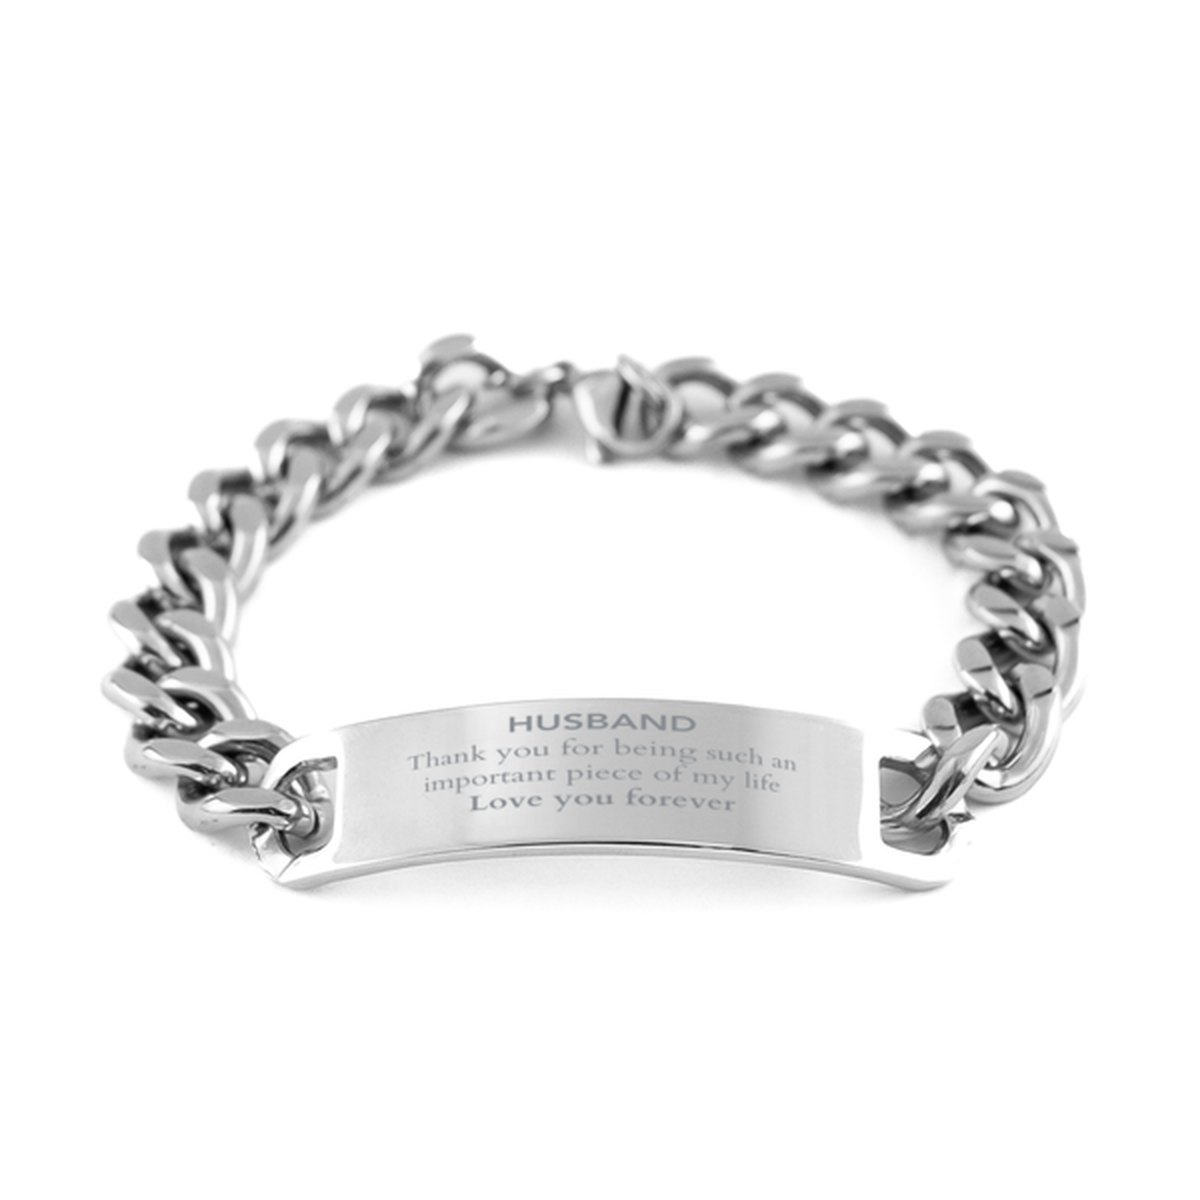 Appropriate Husband Cuban Chain Stainless Steel Bracelet Epic Birthday Gifts for Husband Thank you for being such an important piece of my life Husband Christmas Mothers Fathers Day